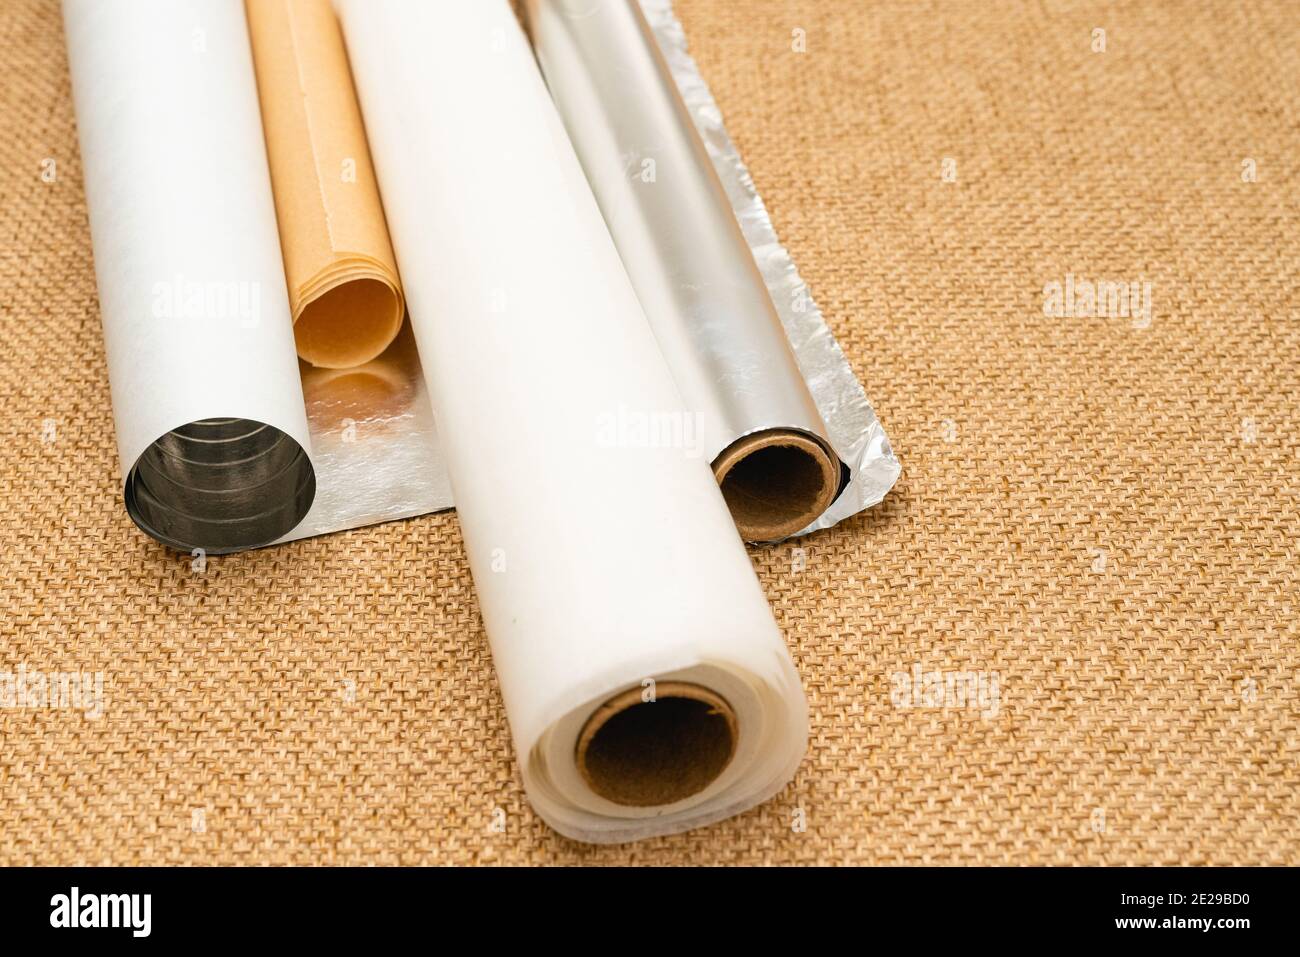 https://c8.alamy.com/comp/2E29BD0/different-type-of-paper-for-baking-needs-parchment-paper-foil-wax-paper-close-up-on-rustic-background-2E29BD0.jpg